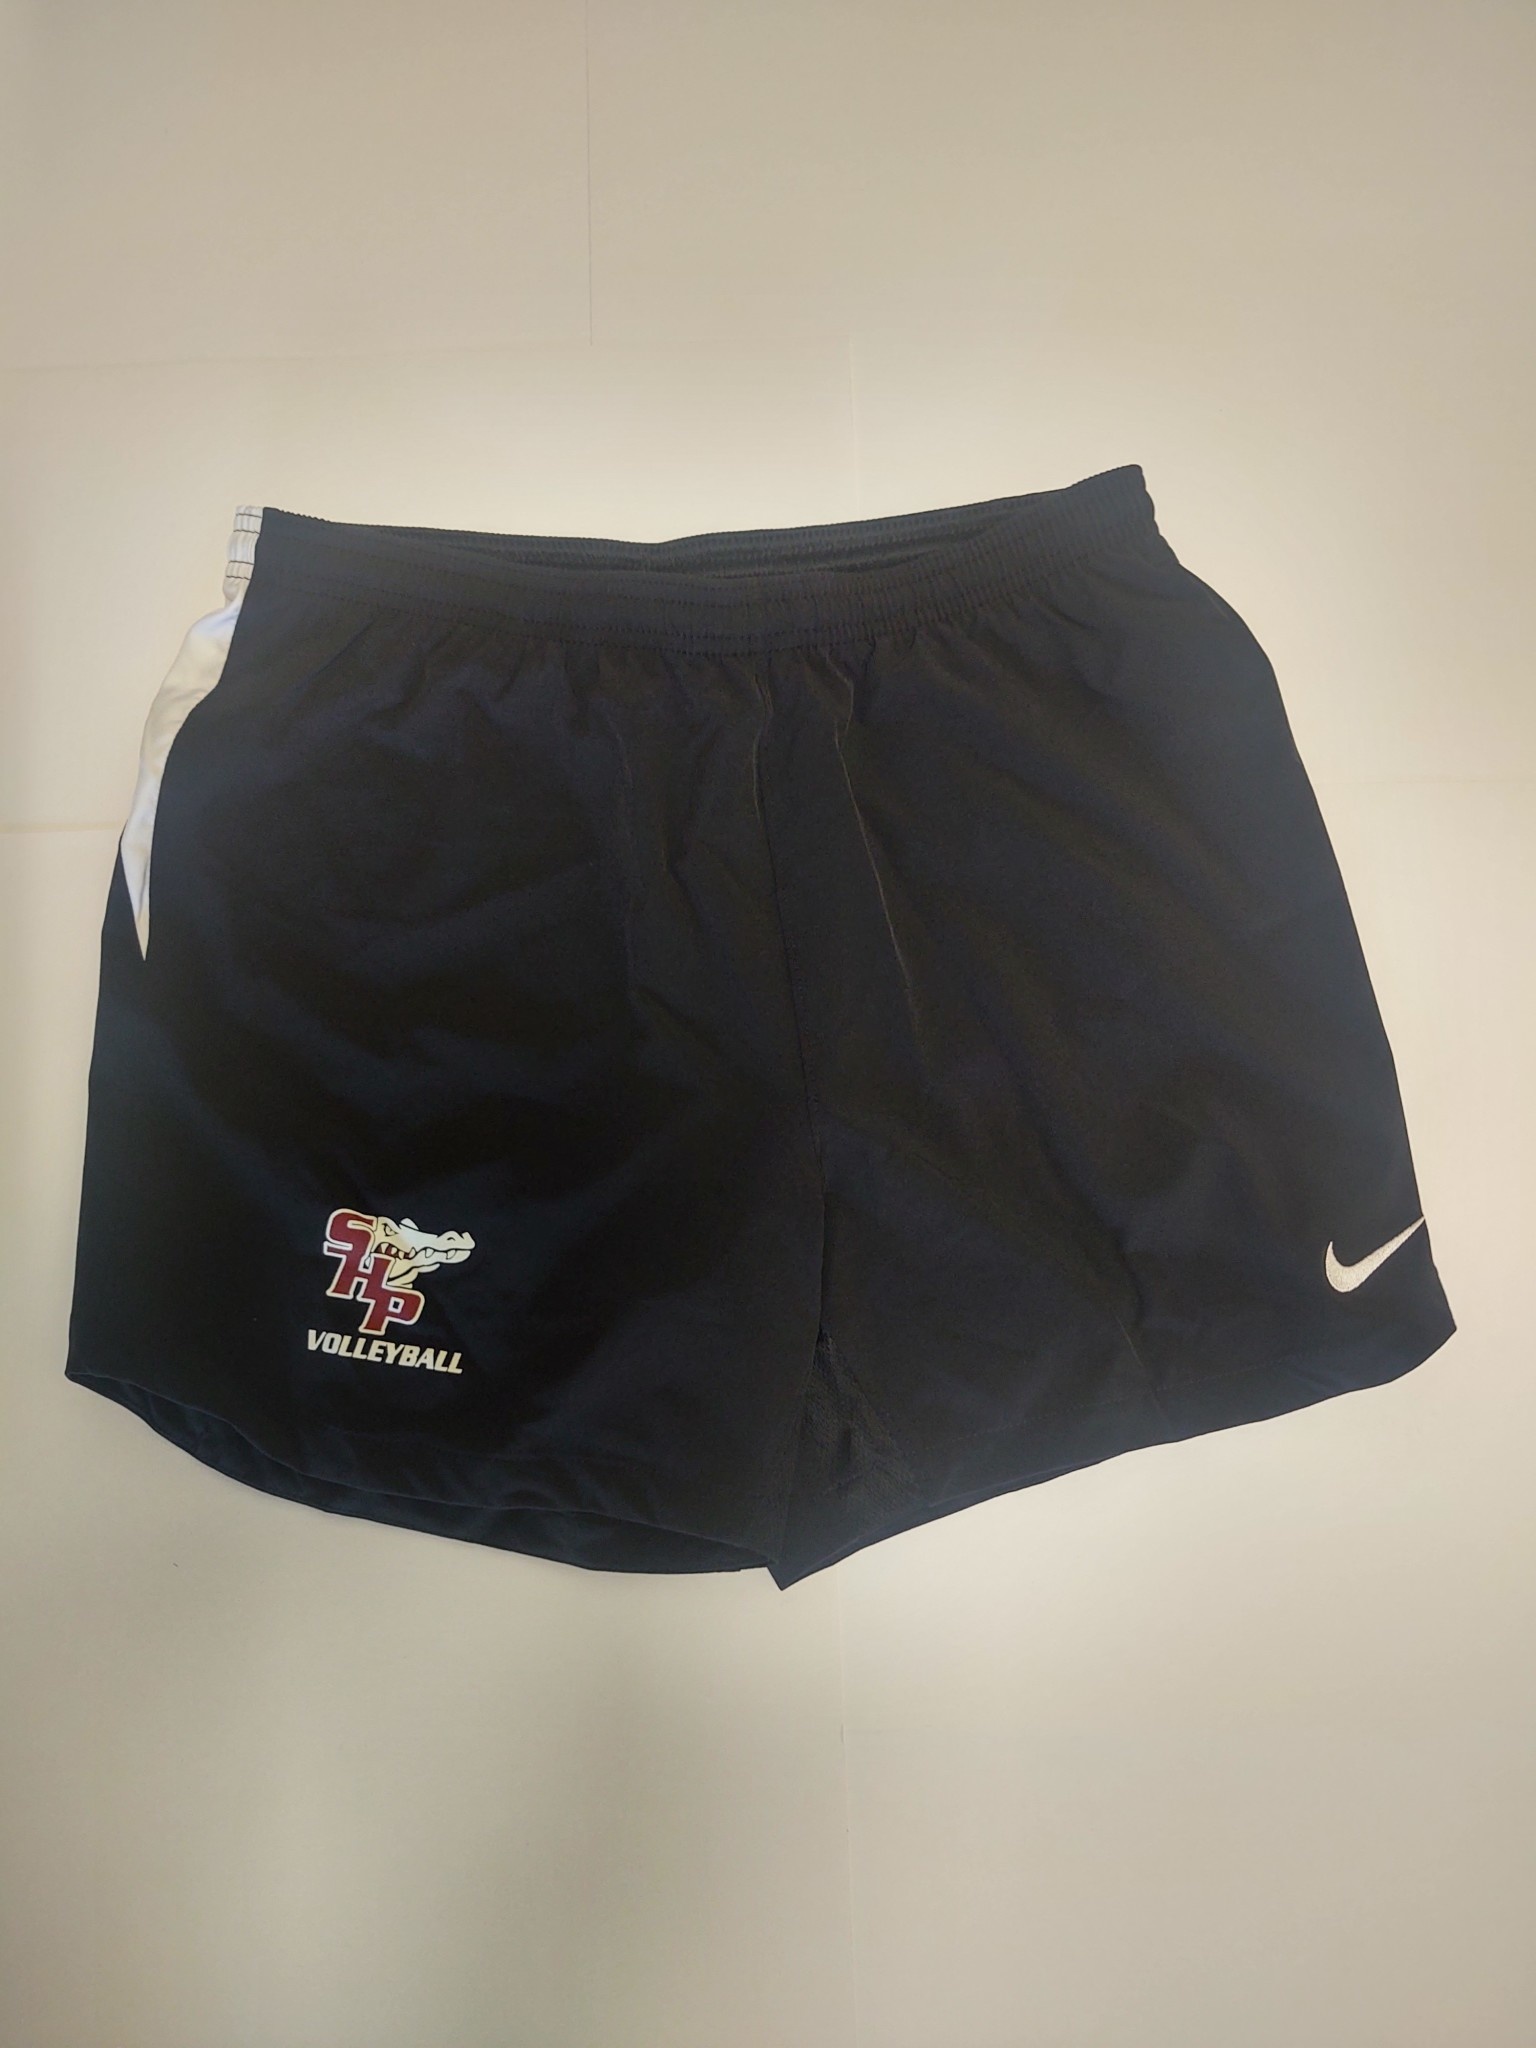 Girl's Volleyball Shorts